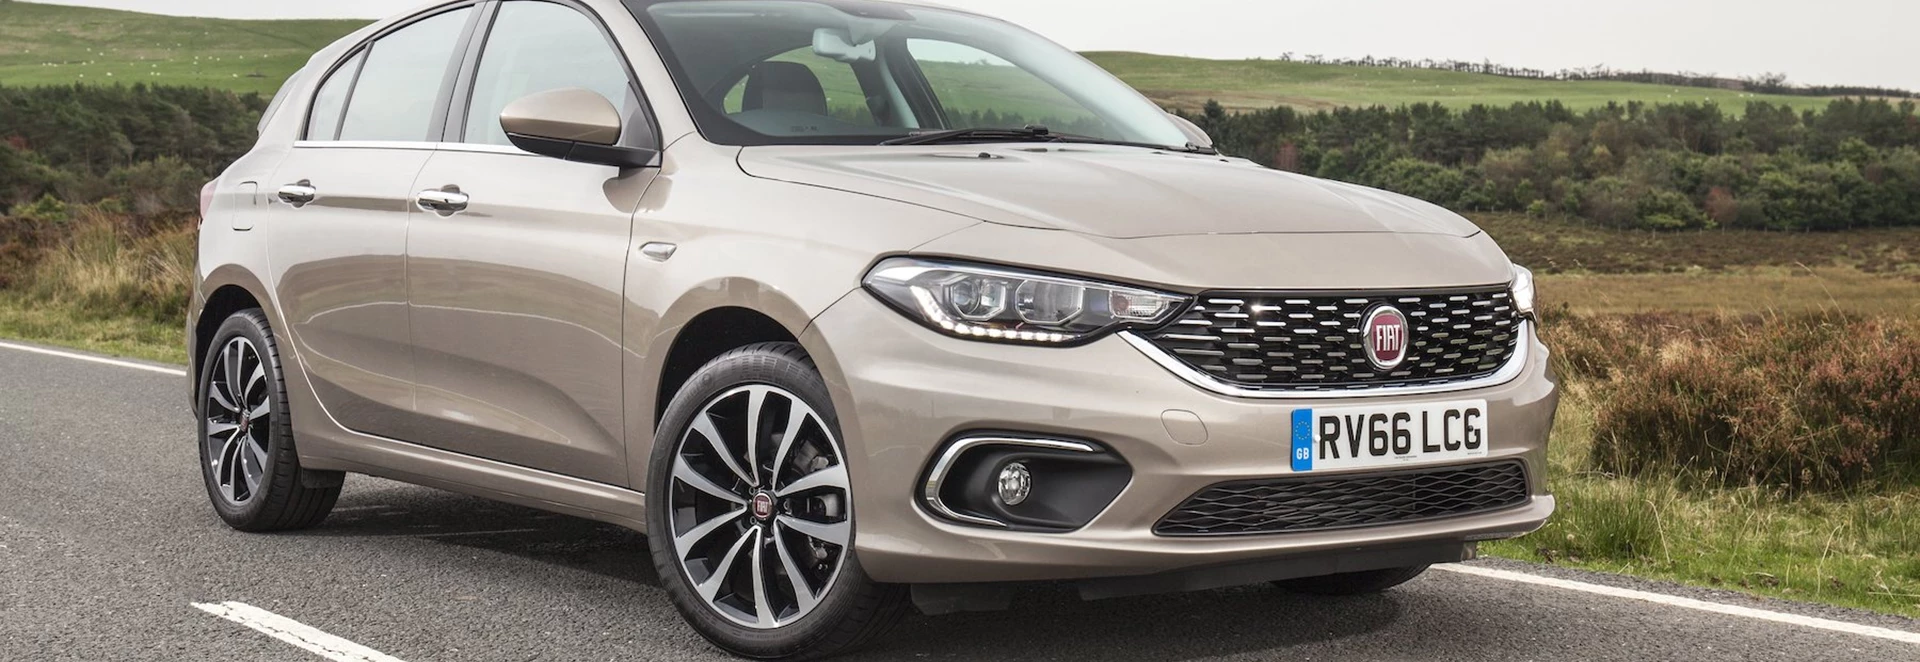 Here’s why the Fiat Tipo is a great family car 